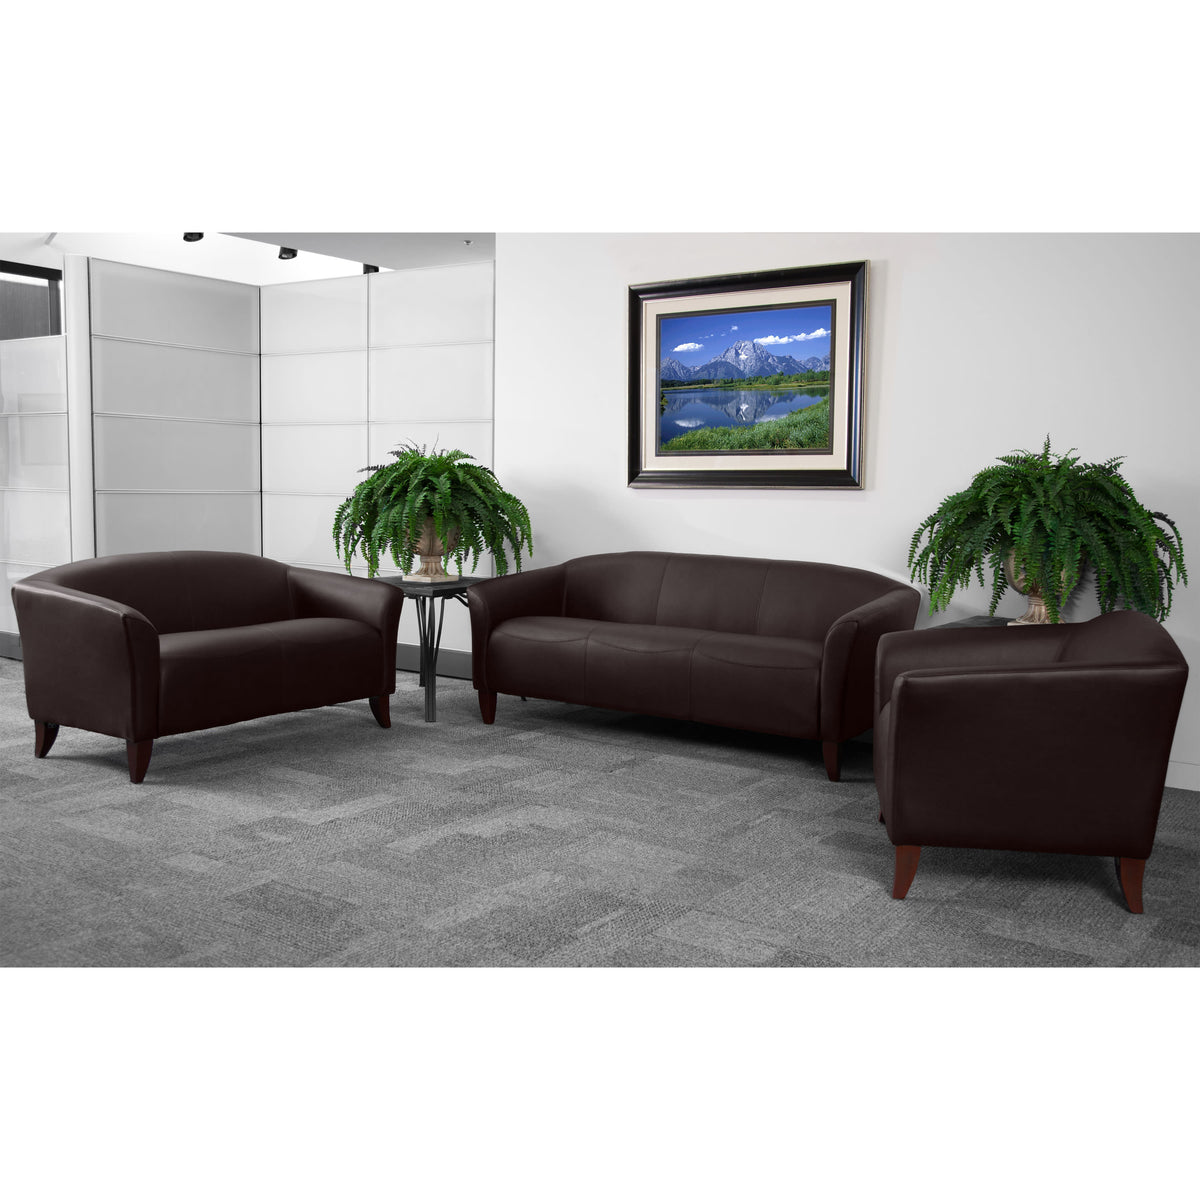 Brown |#| Brown LeatherSoft Chair with Cherry Wood Feet - Lobby or Guest Seating